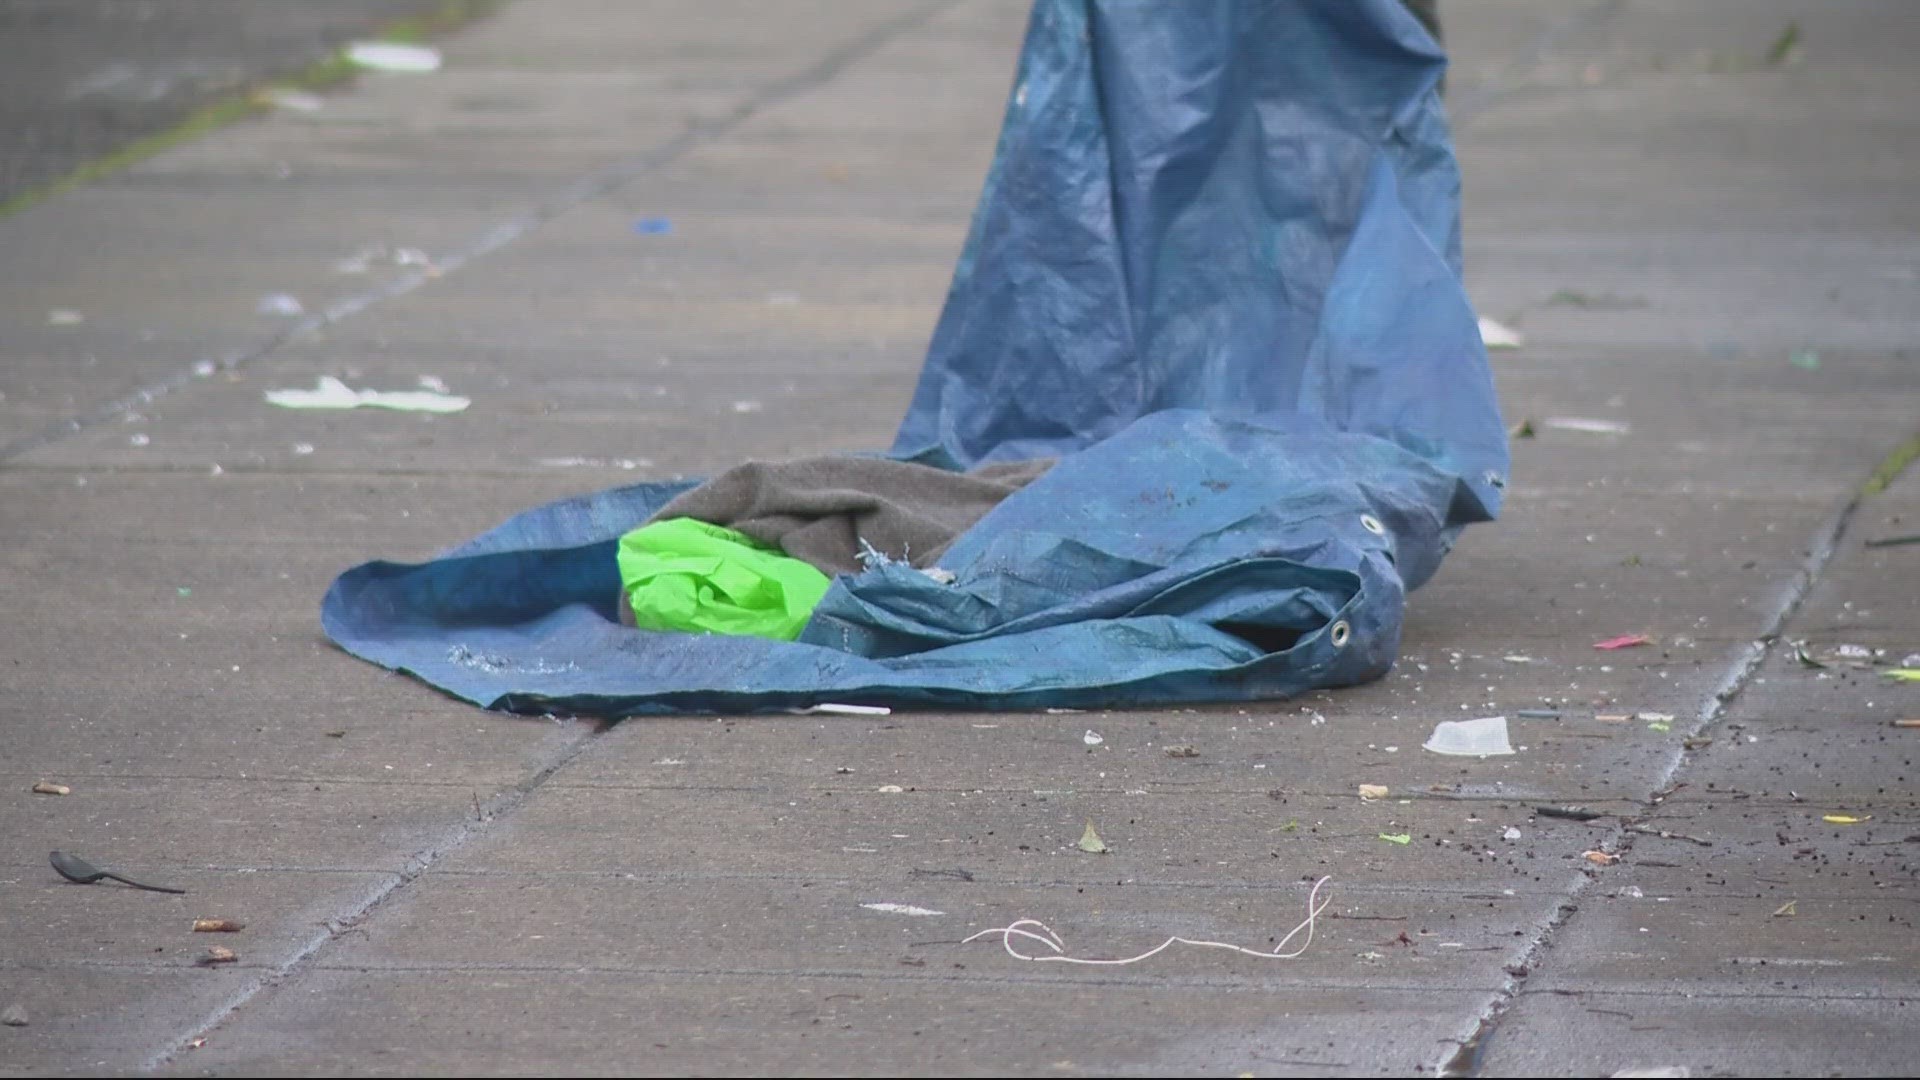 The Multnomah County Health Department issued a public health warning after increased cases of an illness called “Shigella” were found in Old Town.